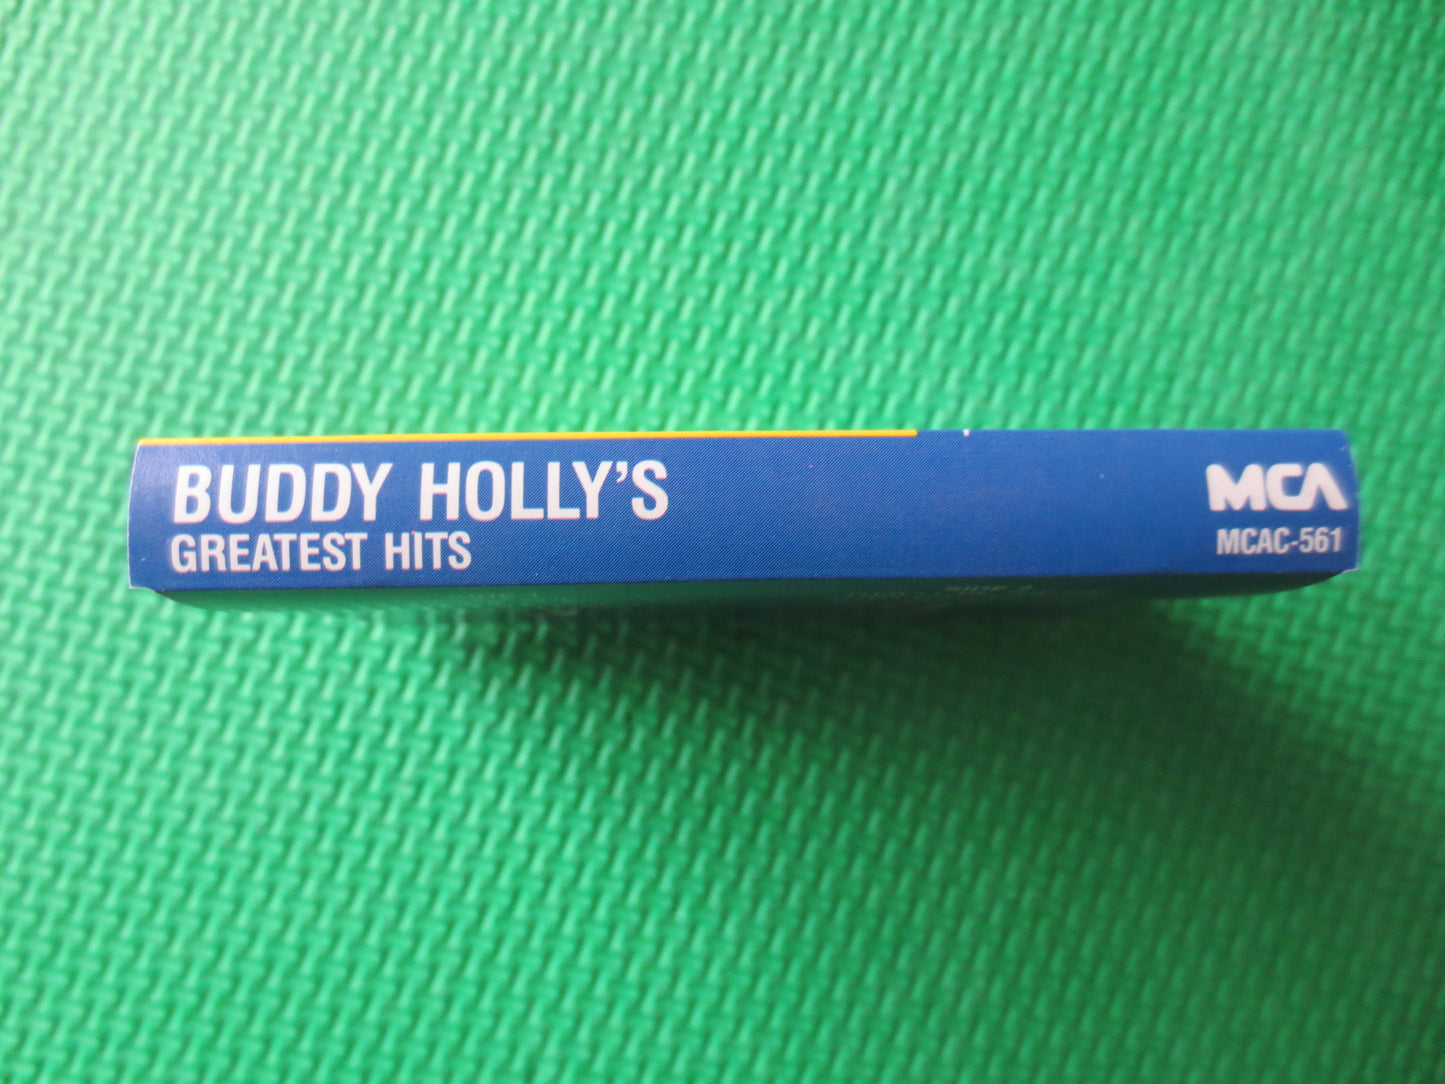 BUDDY HOLLY, GREATEST Hits, Buddy Holly Cassette, Buddy Holly Tape, Tape Cassette, Music Cassette, Pop Tapes, 1985 Cassette